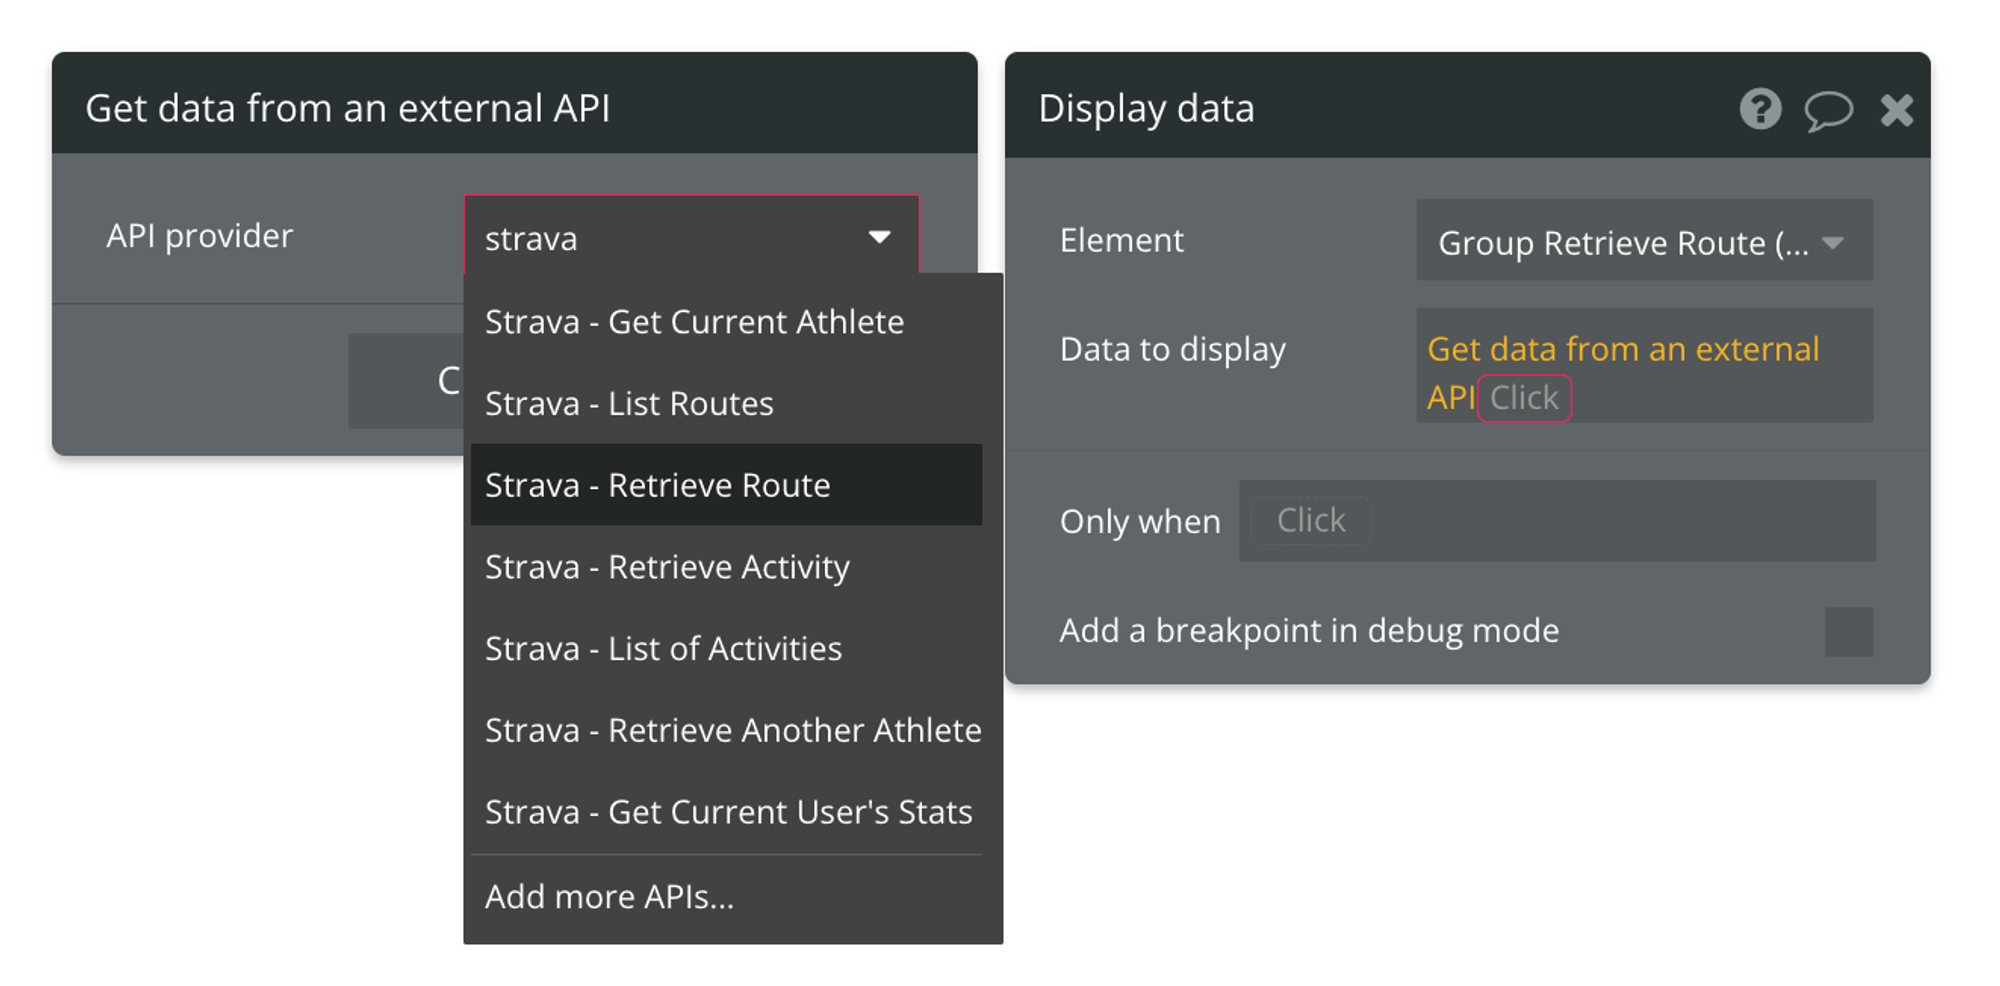 Select "Get data from external API" from the list of data sources, then find Strava - Retrieve Route from the list of API providers